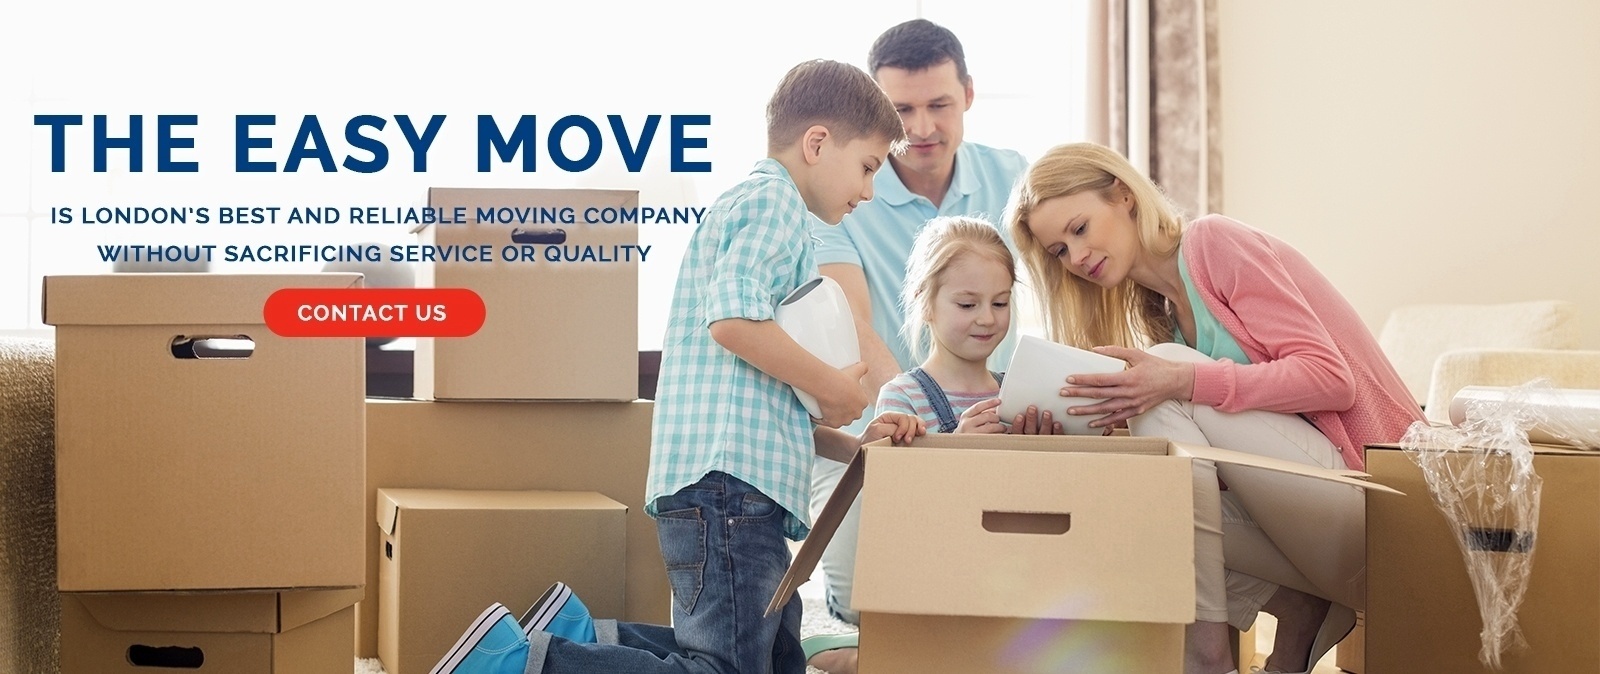 Moving Services in London ON by The Easy Move